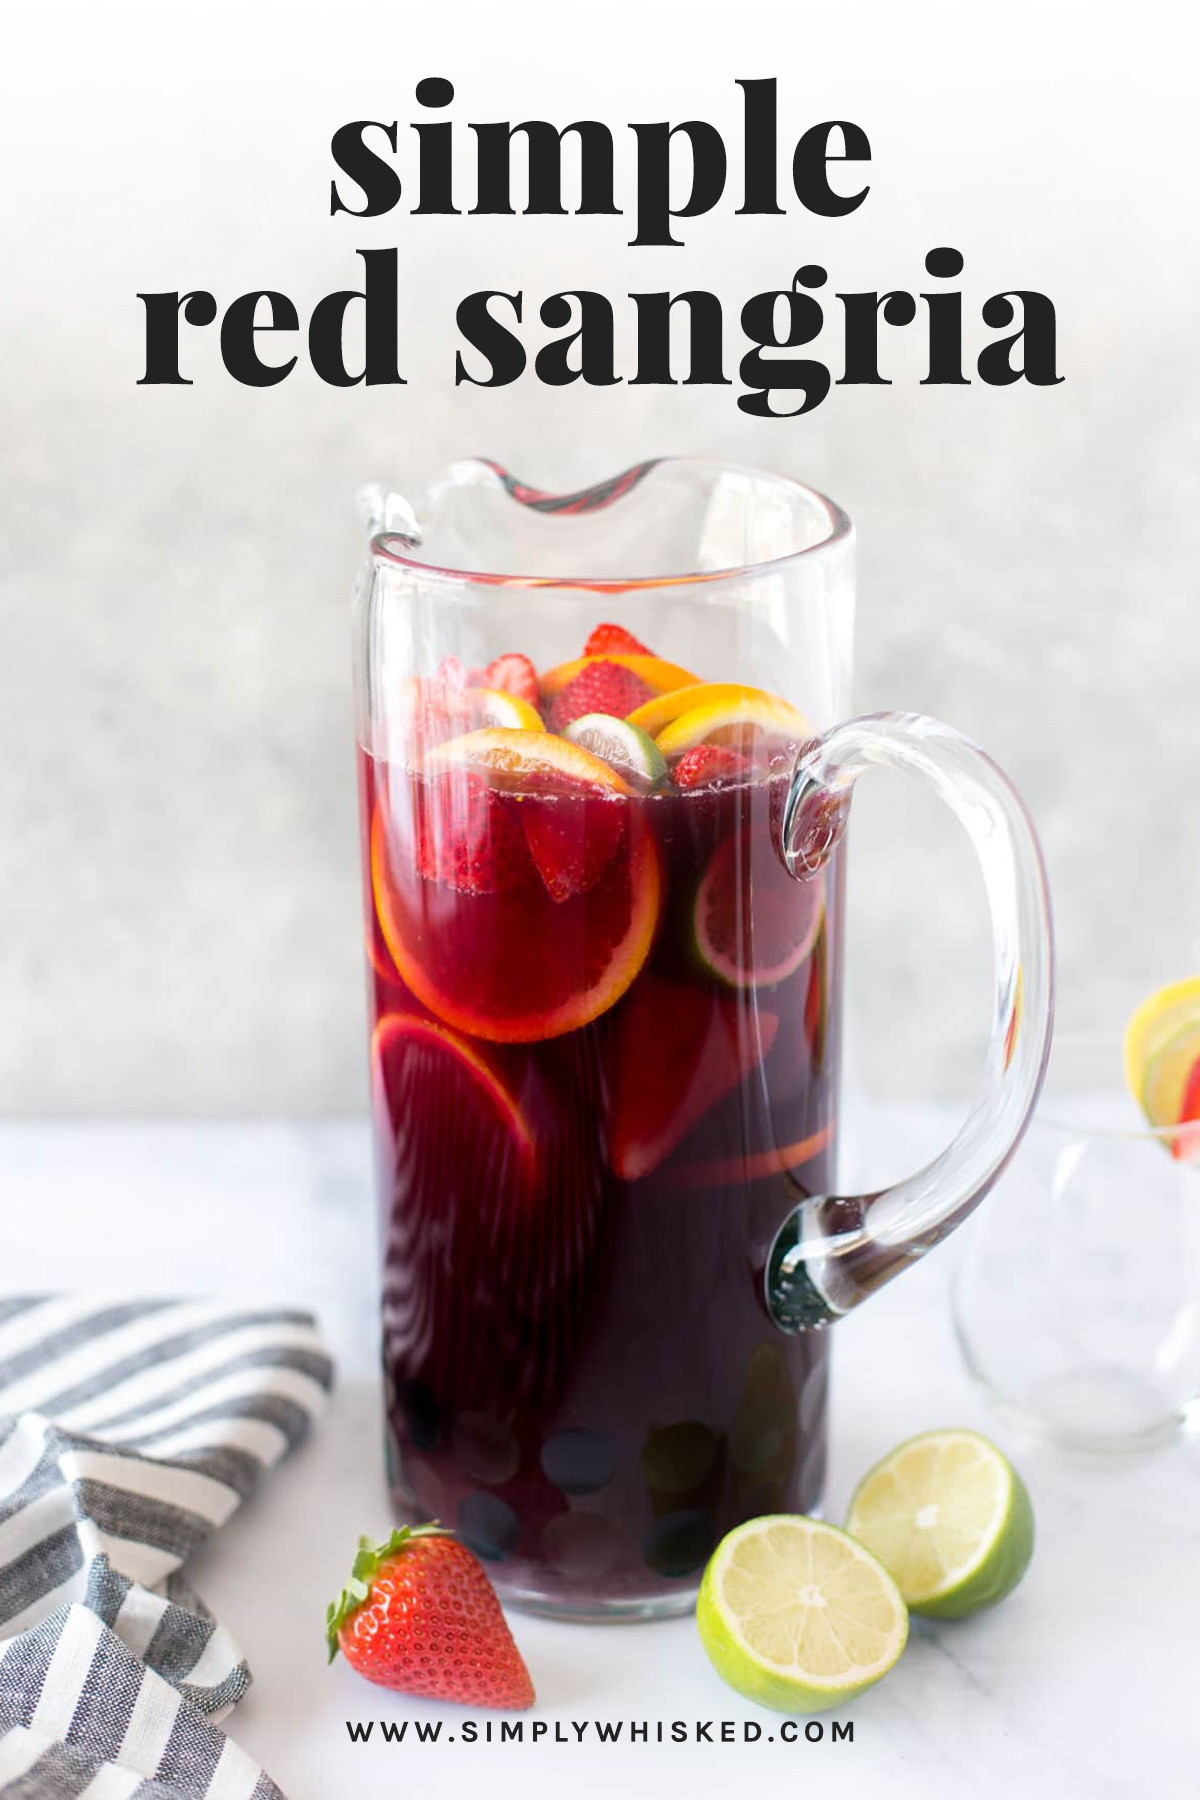 Simple Red Sangria Recipe Simply Whisked,Parmigiano Reggiano Cheese Costco